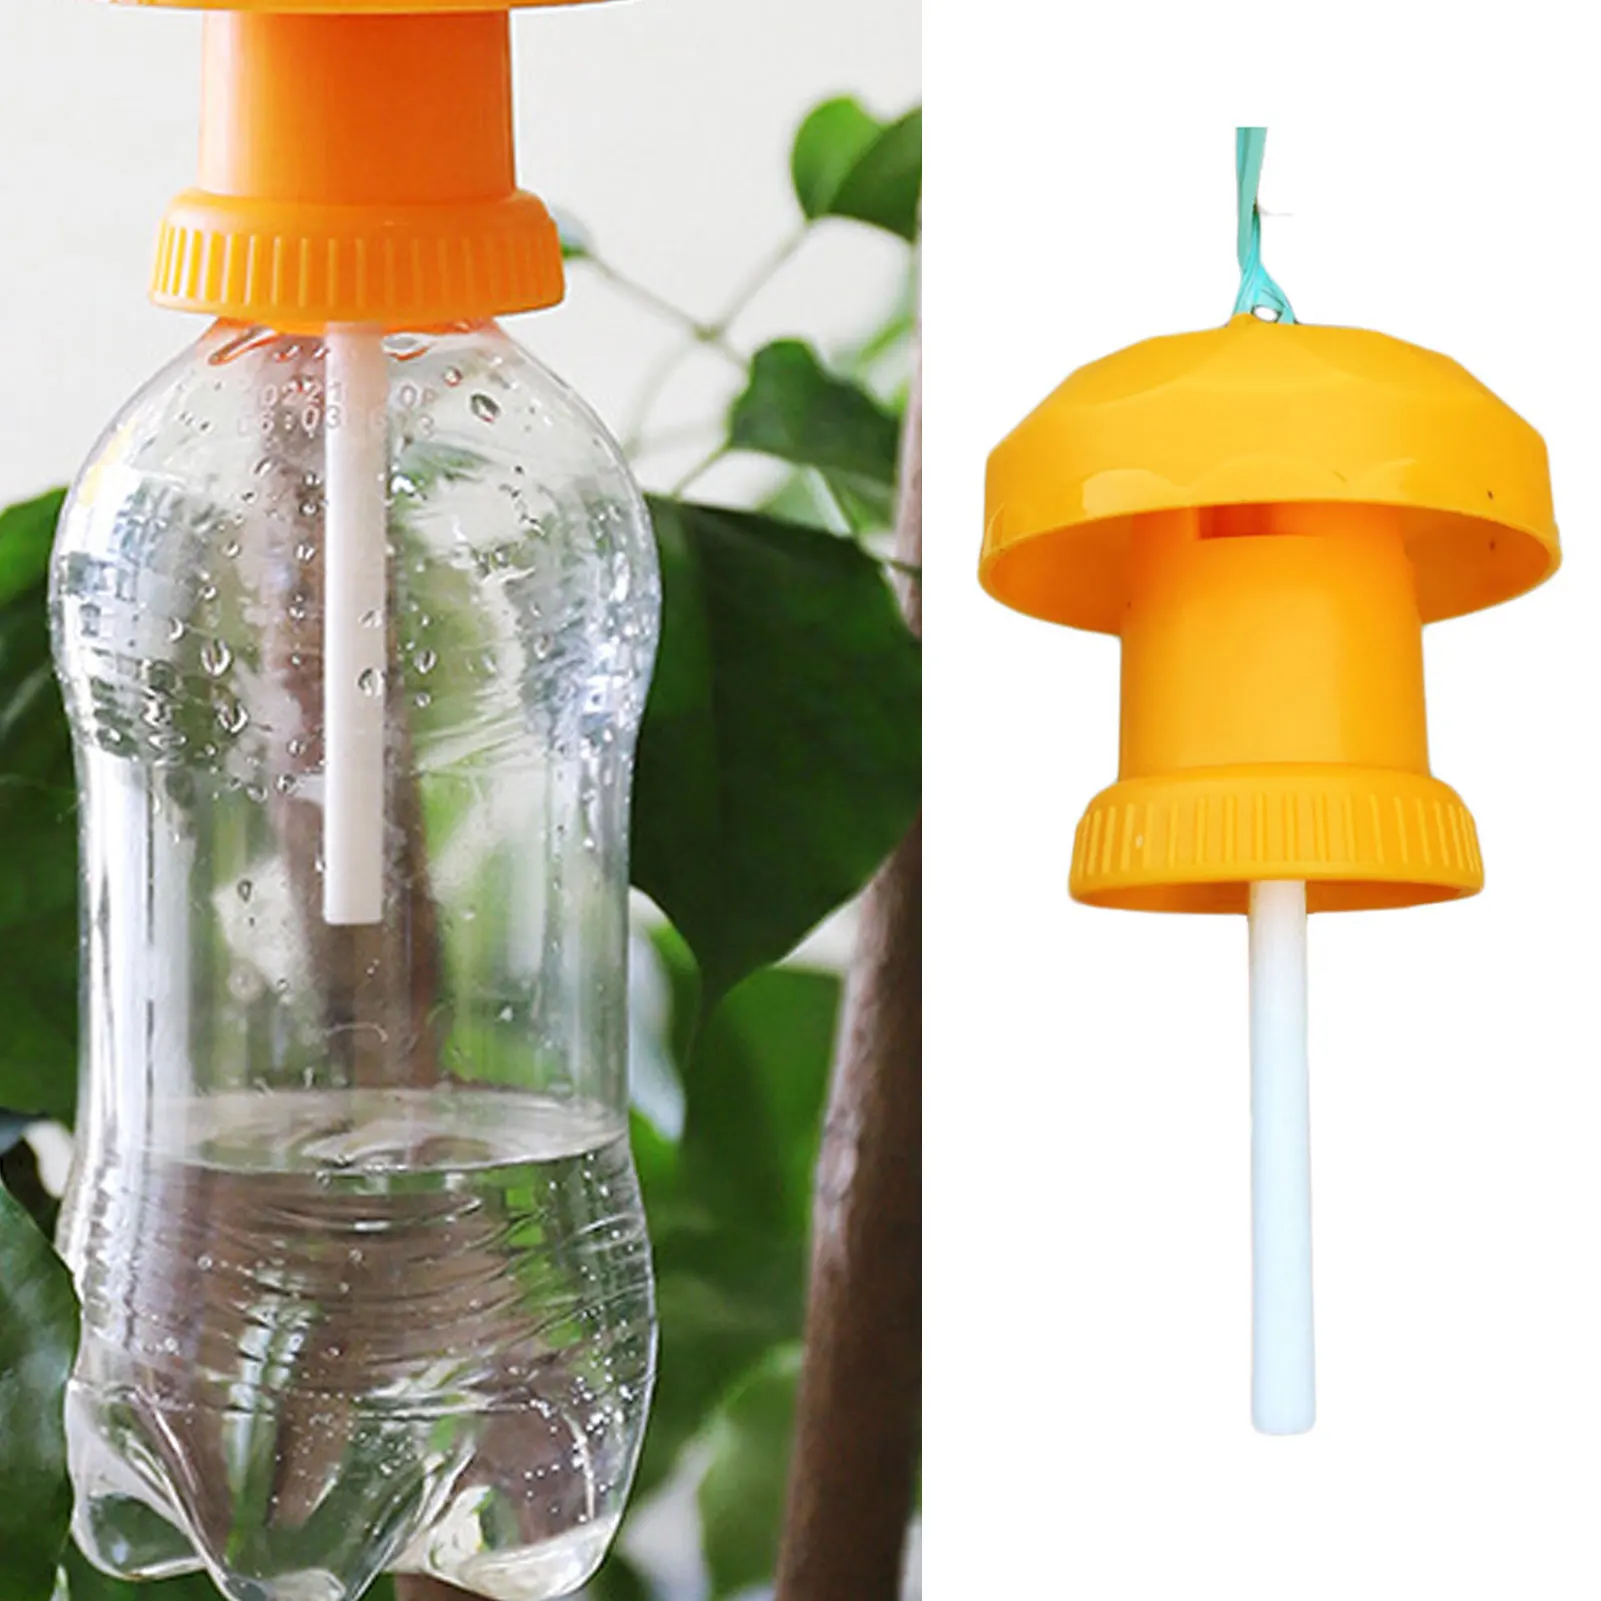 

Fruit Fly Trap Killer Plastic Yellow Drosophila Trap Fly Catcher Traps Pest Insect Control For Home Gardens Farm Orchard